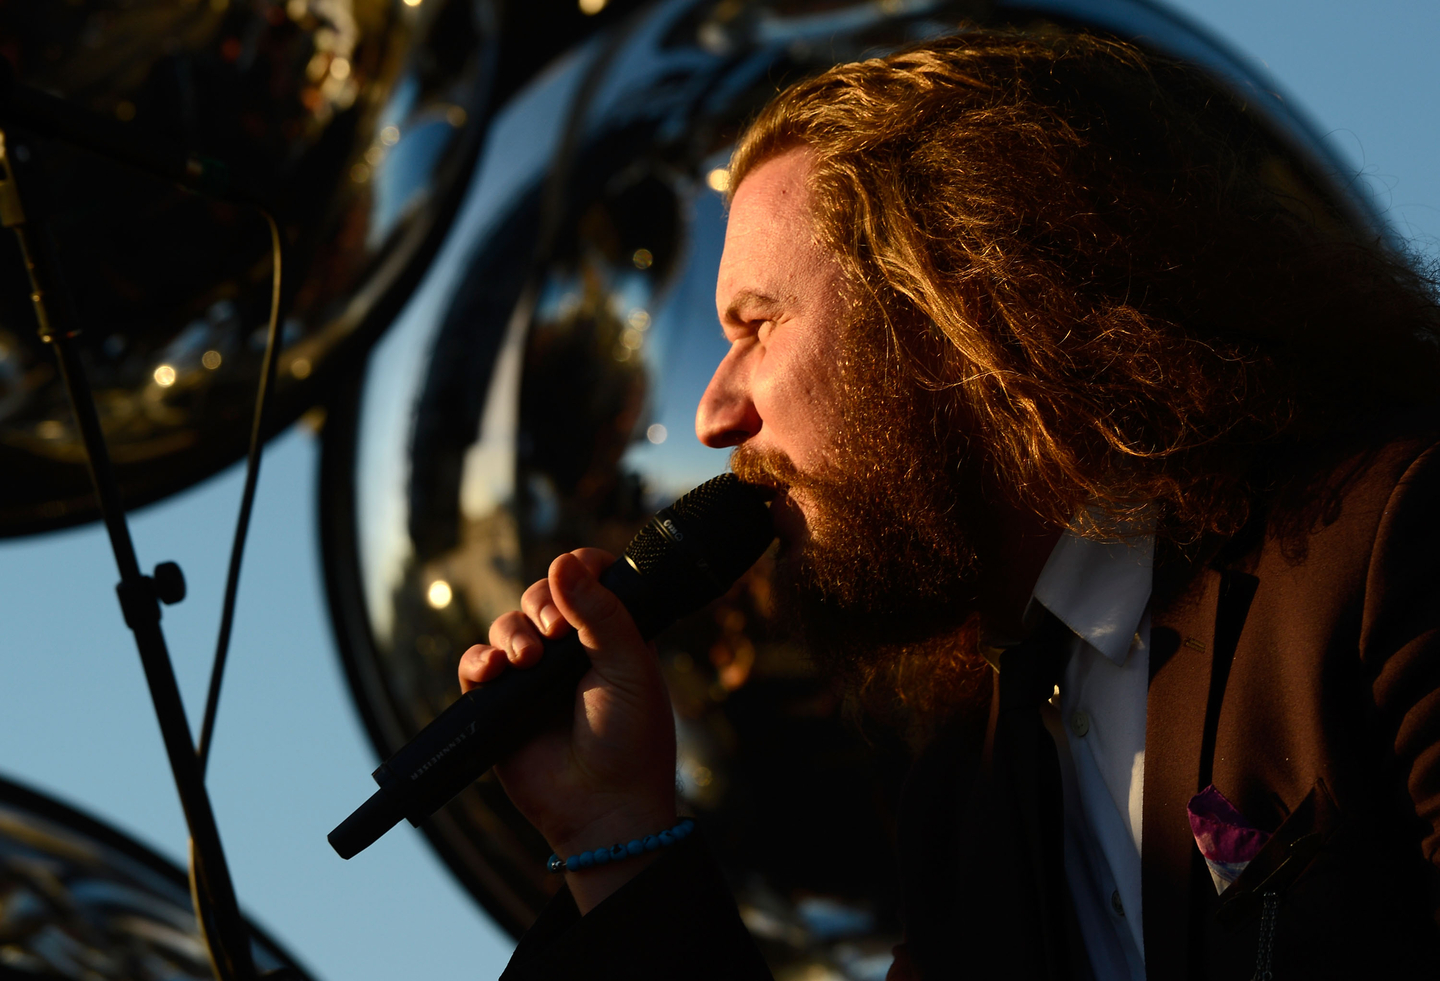 Jim James, 2013. Photo by Mark Davis/Getty Images for SXSW